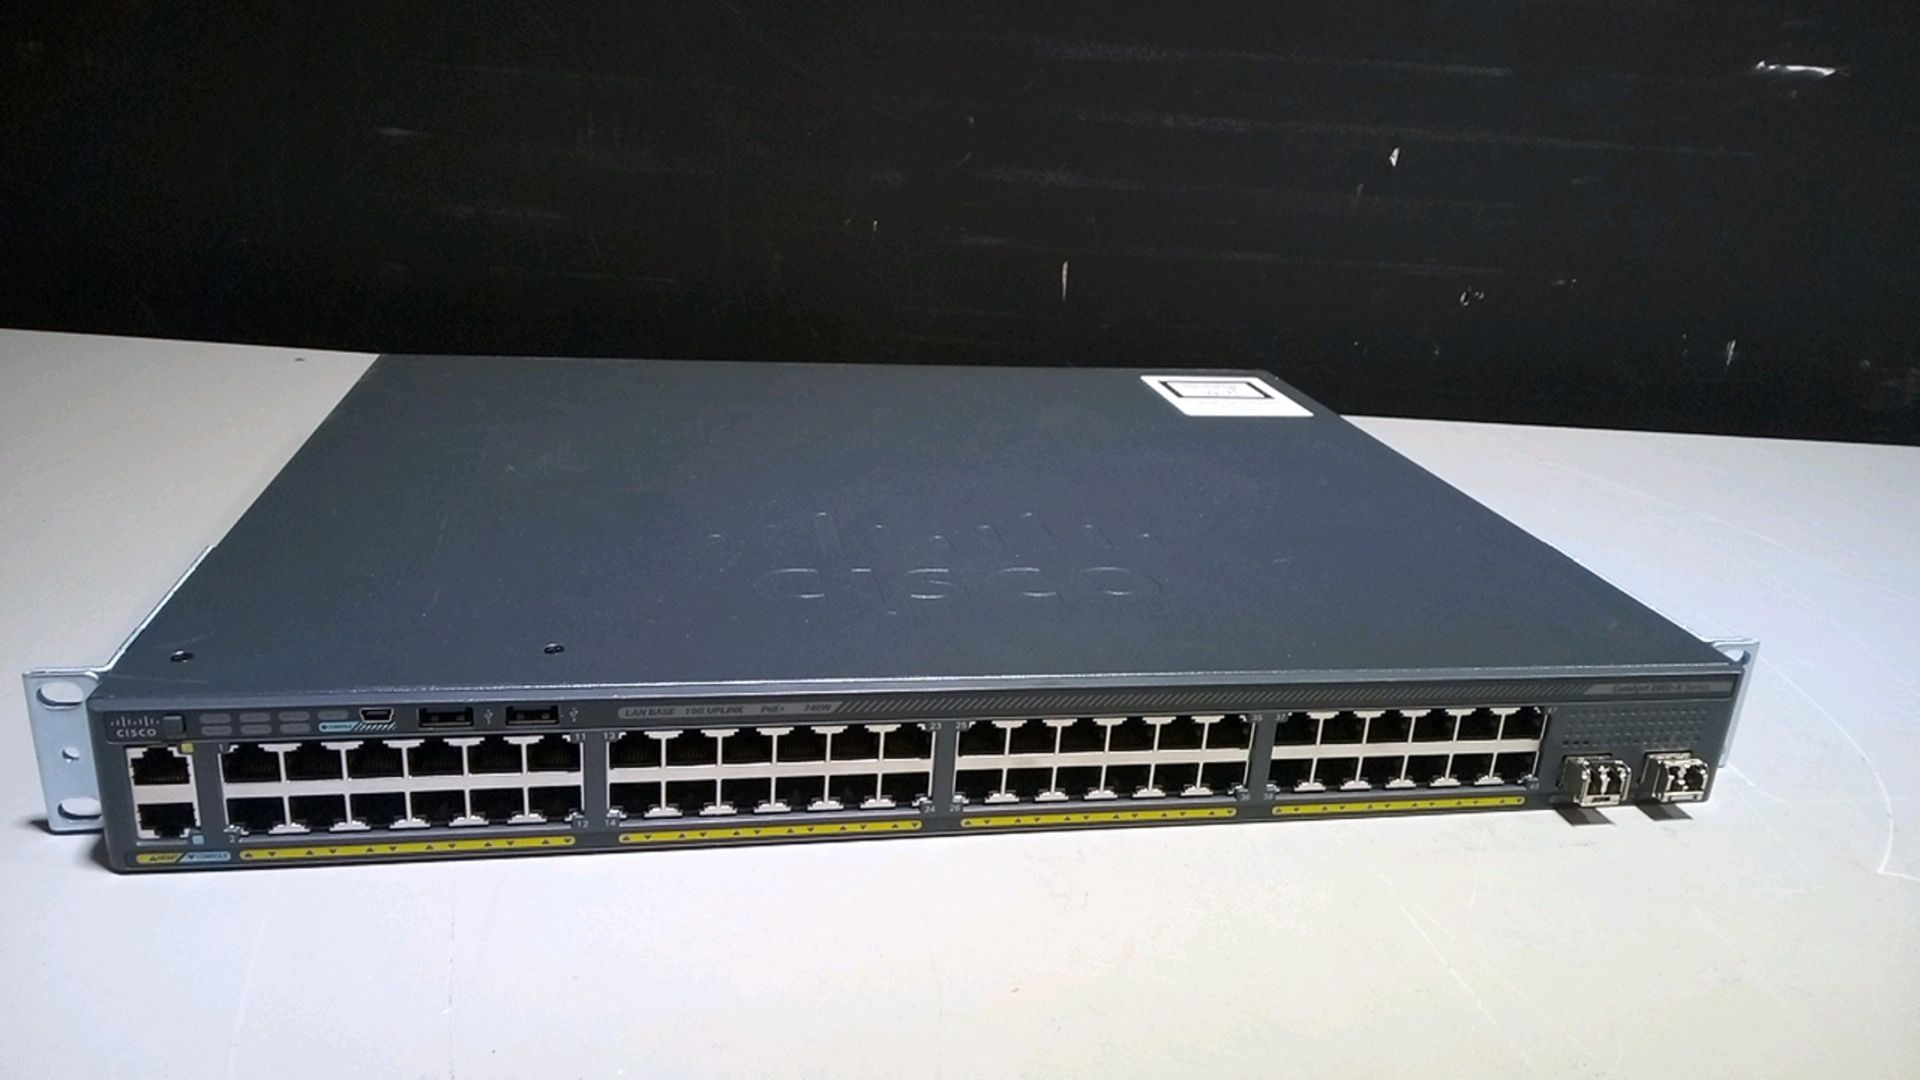 CISCO SYSTEMS WS-C2960X-48FPD-L SWITCH LOCATED AT: 2440 GREENLEAF AVE, ELK GROVE VILLAGE IL